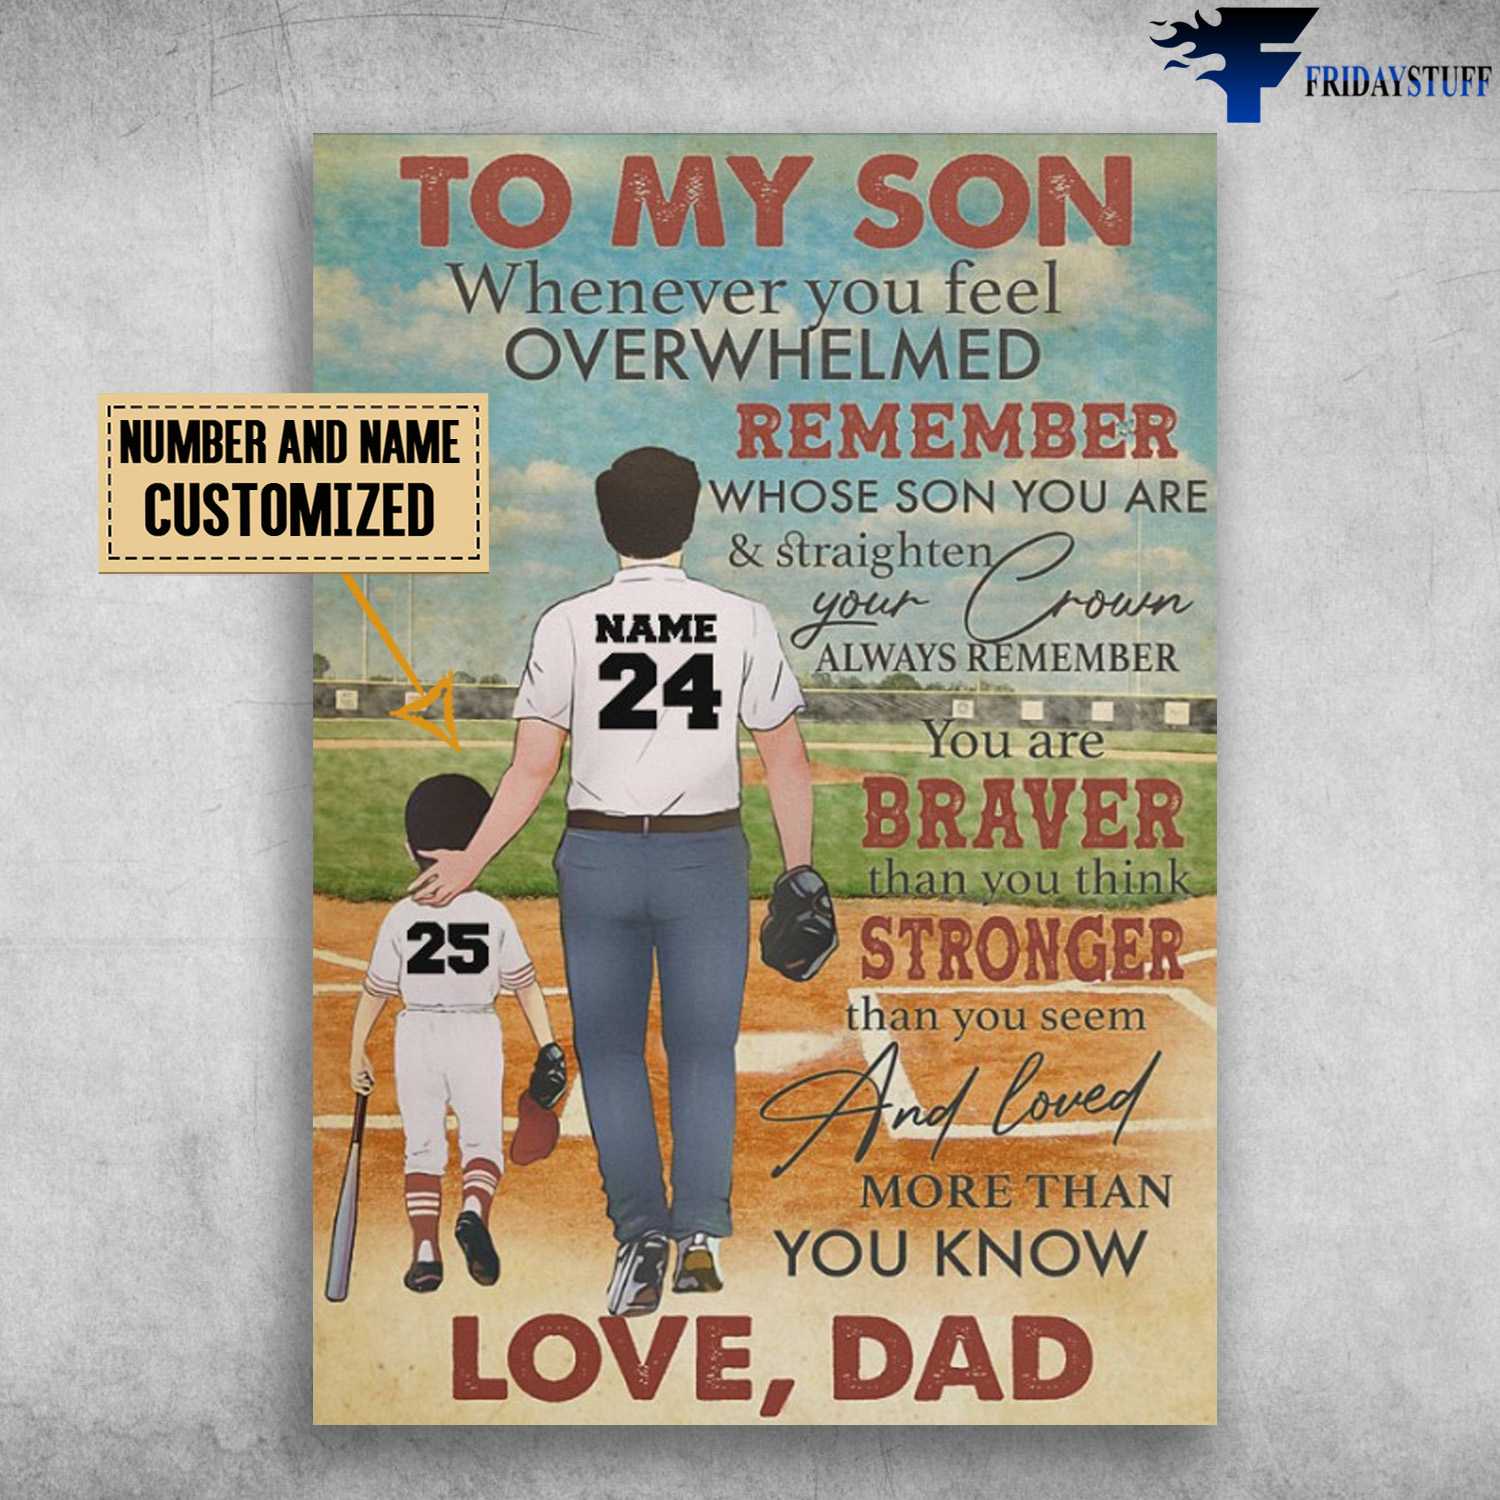 Baseball Dad And Son, To My Son, Whenever You Feel Overwhelmed, Remember Whose Son You Are, And Straighten You Crown, Always Remember You Are Braver